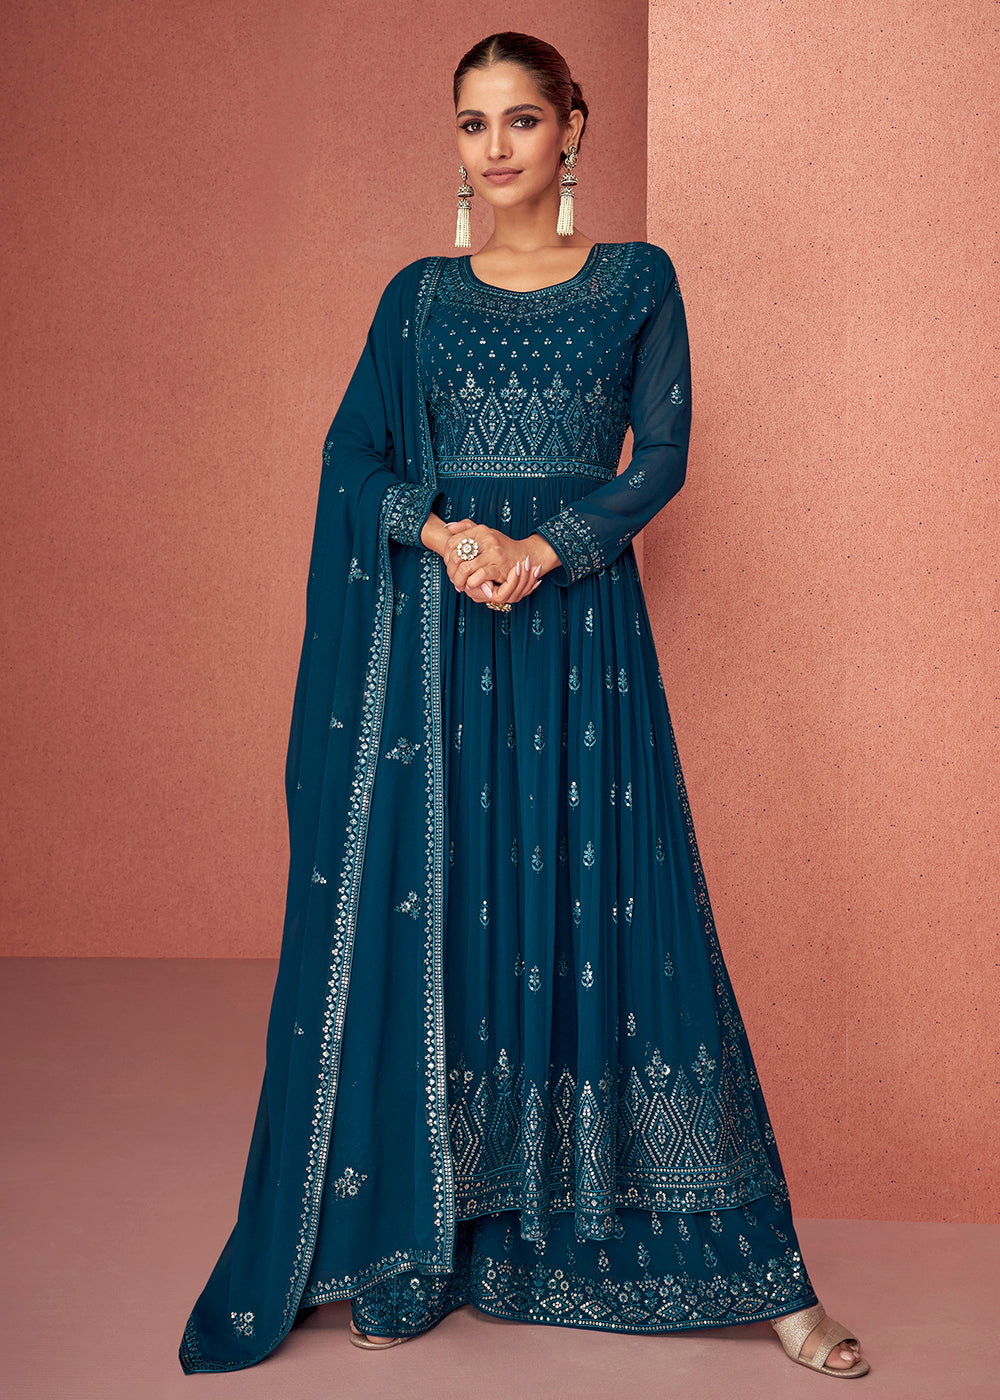 Buy Now Peacock Blue Anarkali Style Georgette Embellished Palazzo Salwar Suit Online in USA, UK, Canada & Worldwide at Empress Clothing. 